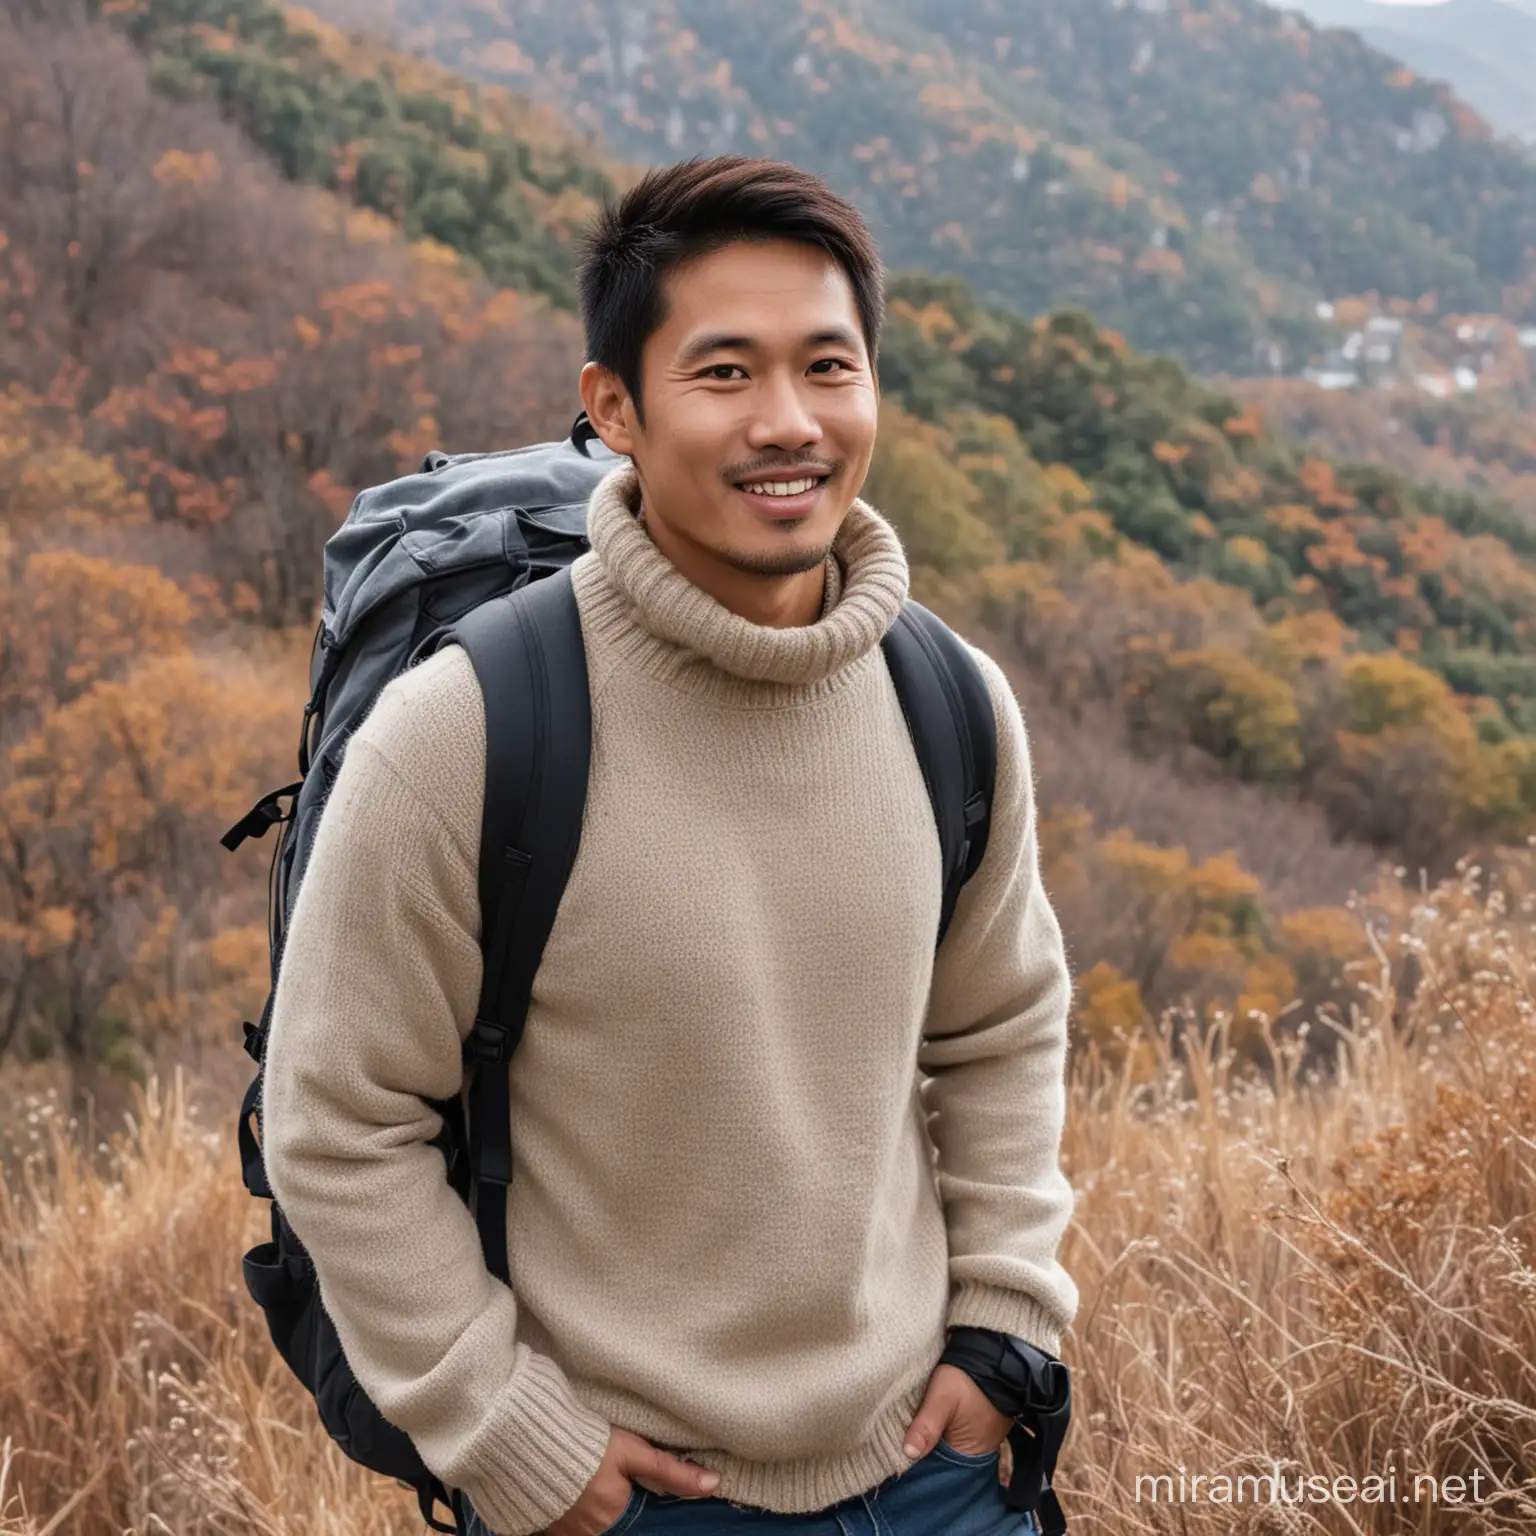 Asian Man Smiling on Mountain Summit Amid Lush Forest Landscape